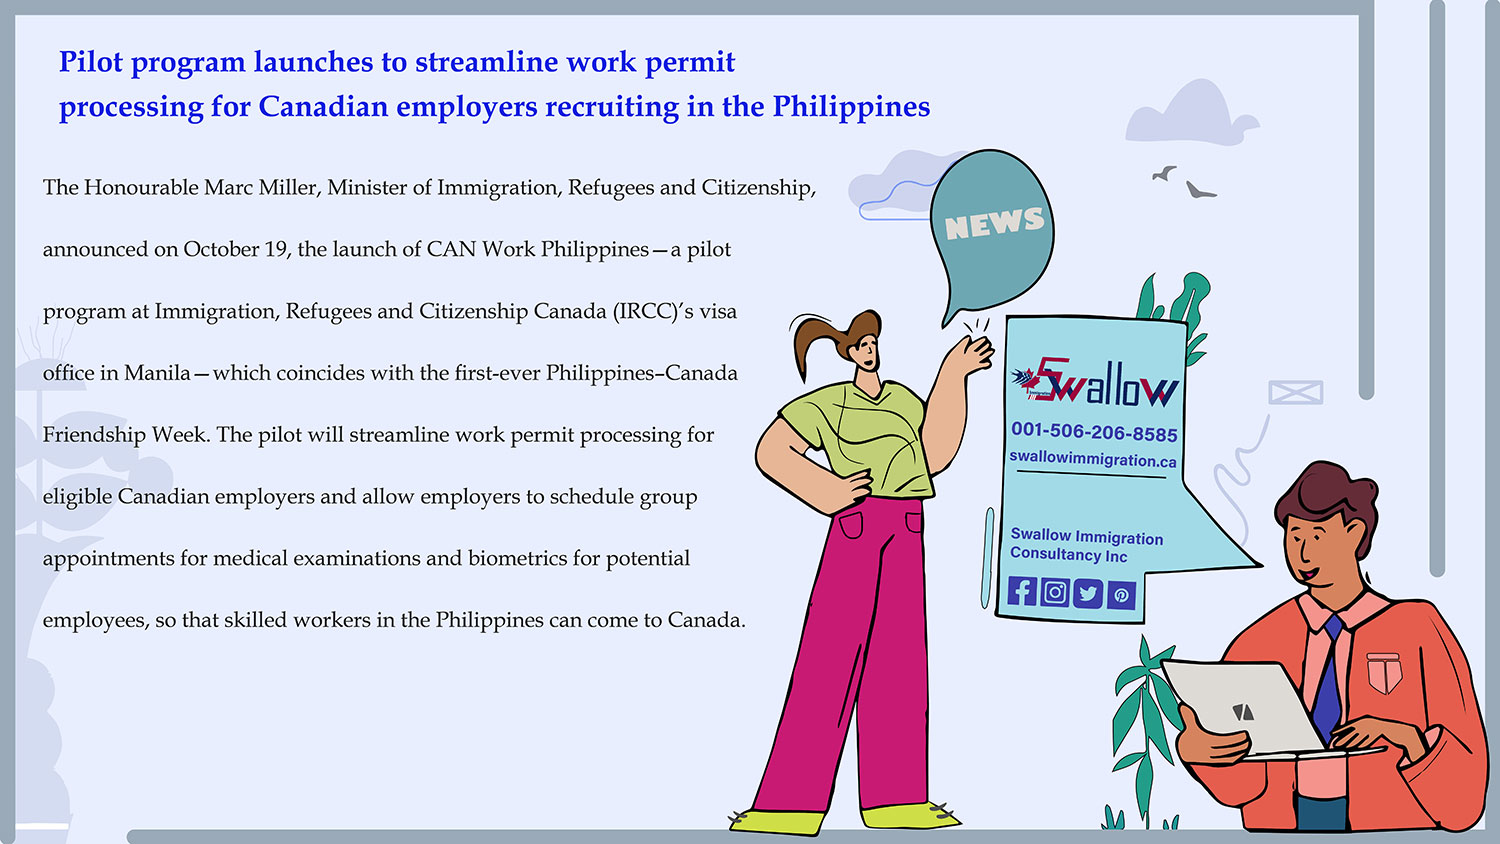 Pilot program launches to streamline work permit processing for Canadian employers recruiting in the Philippines